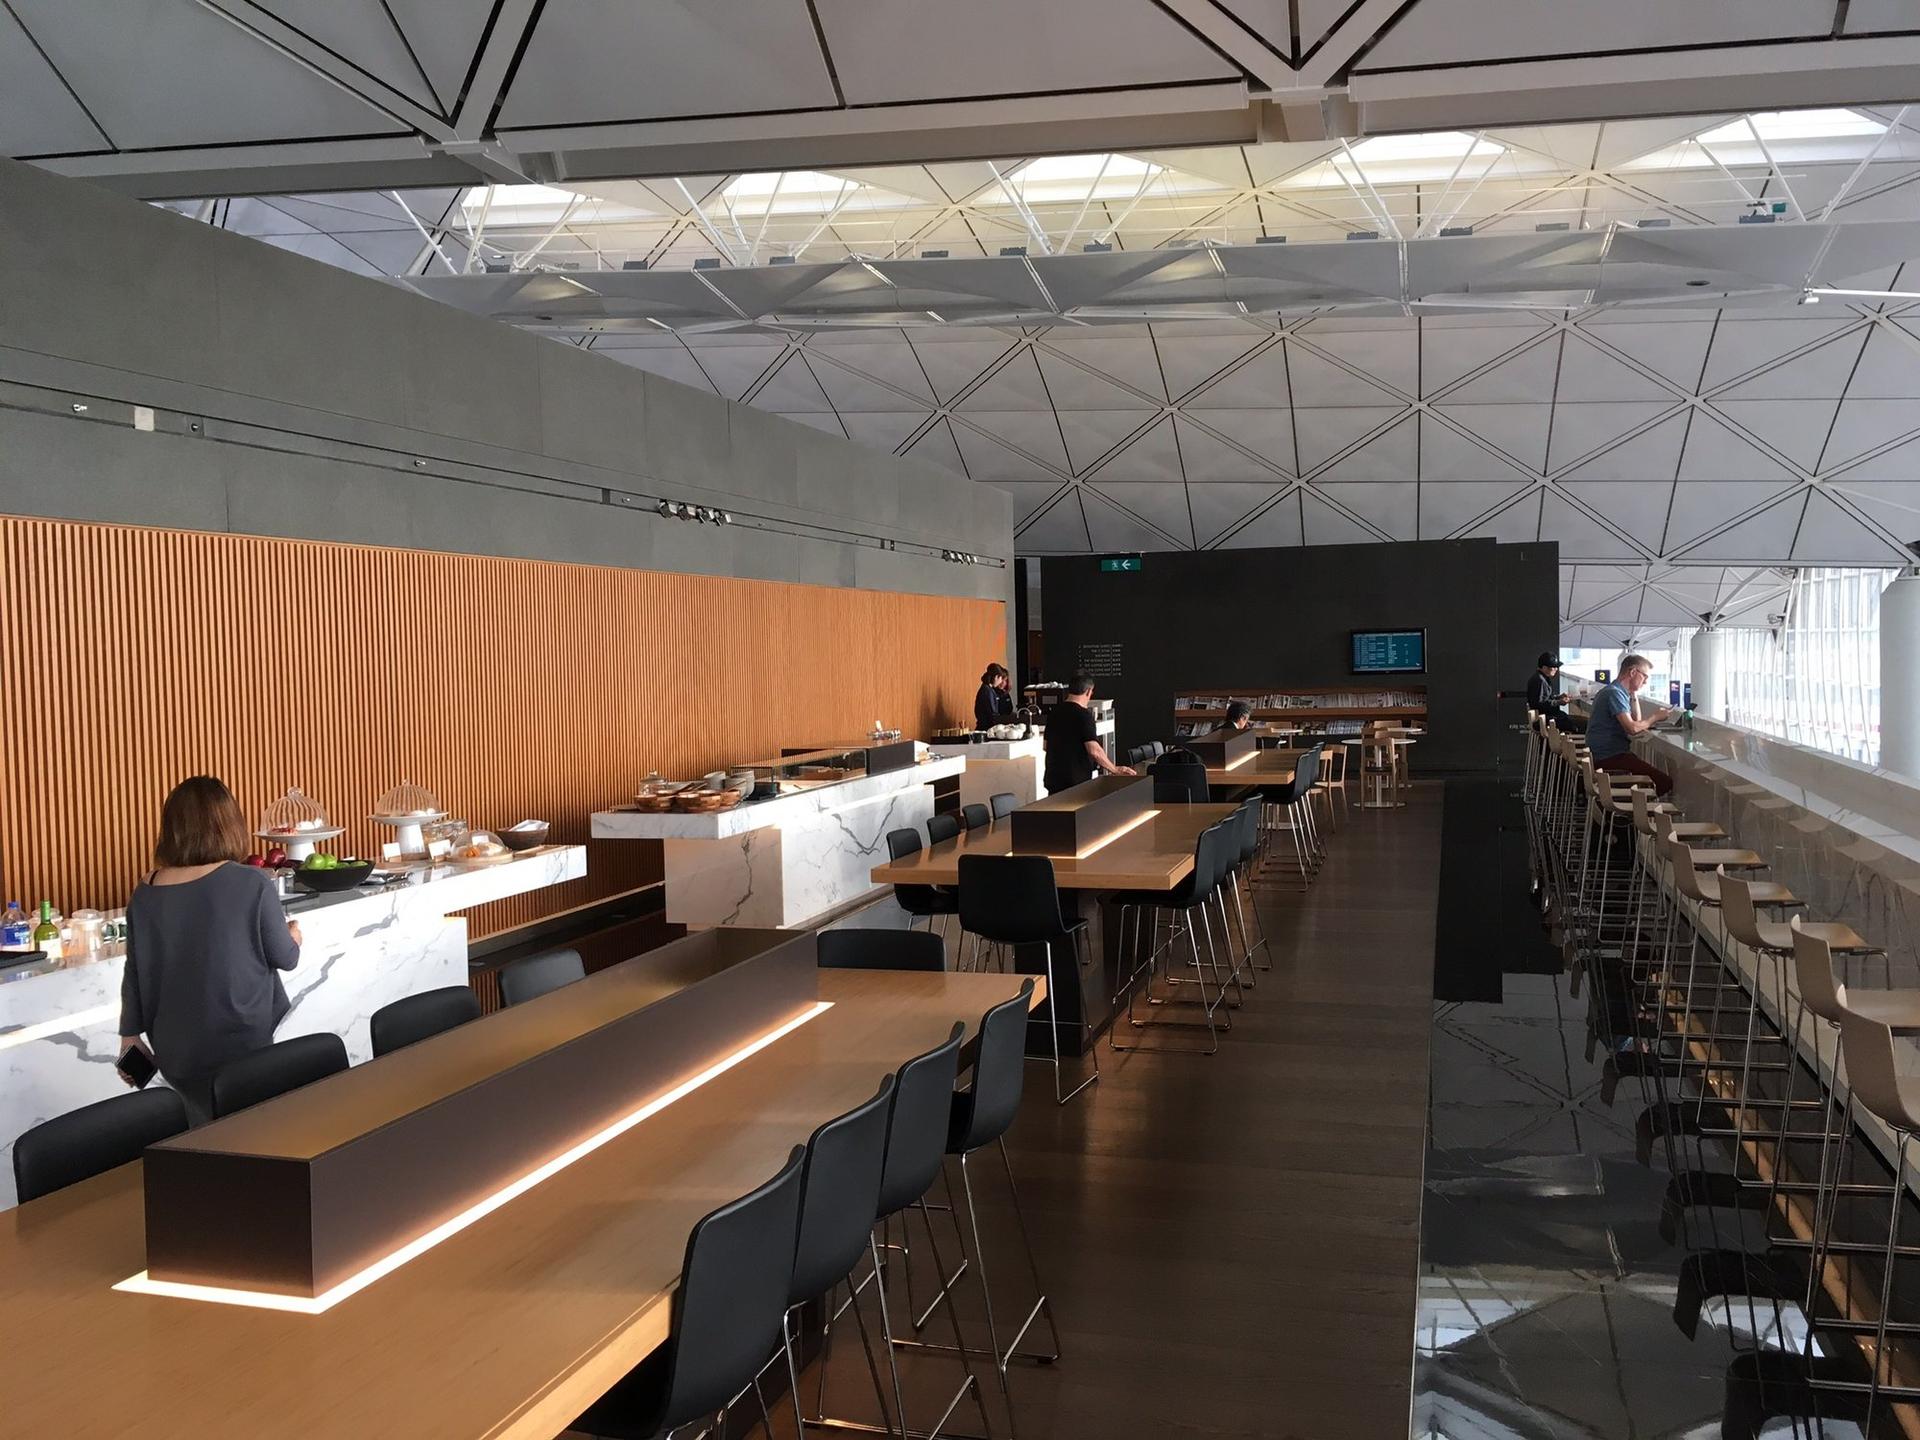 Cathay Pacific The Wing First Class Lounge image 88 of 89